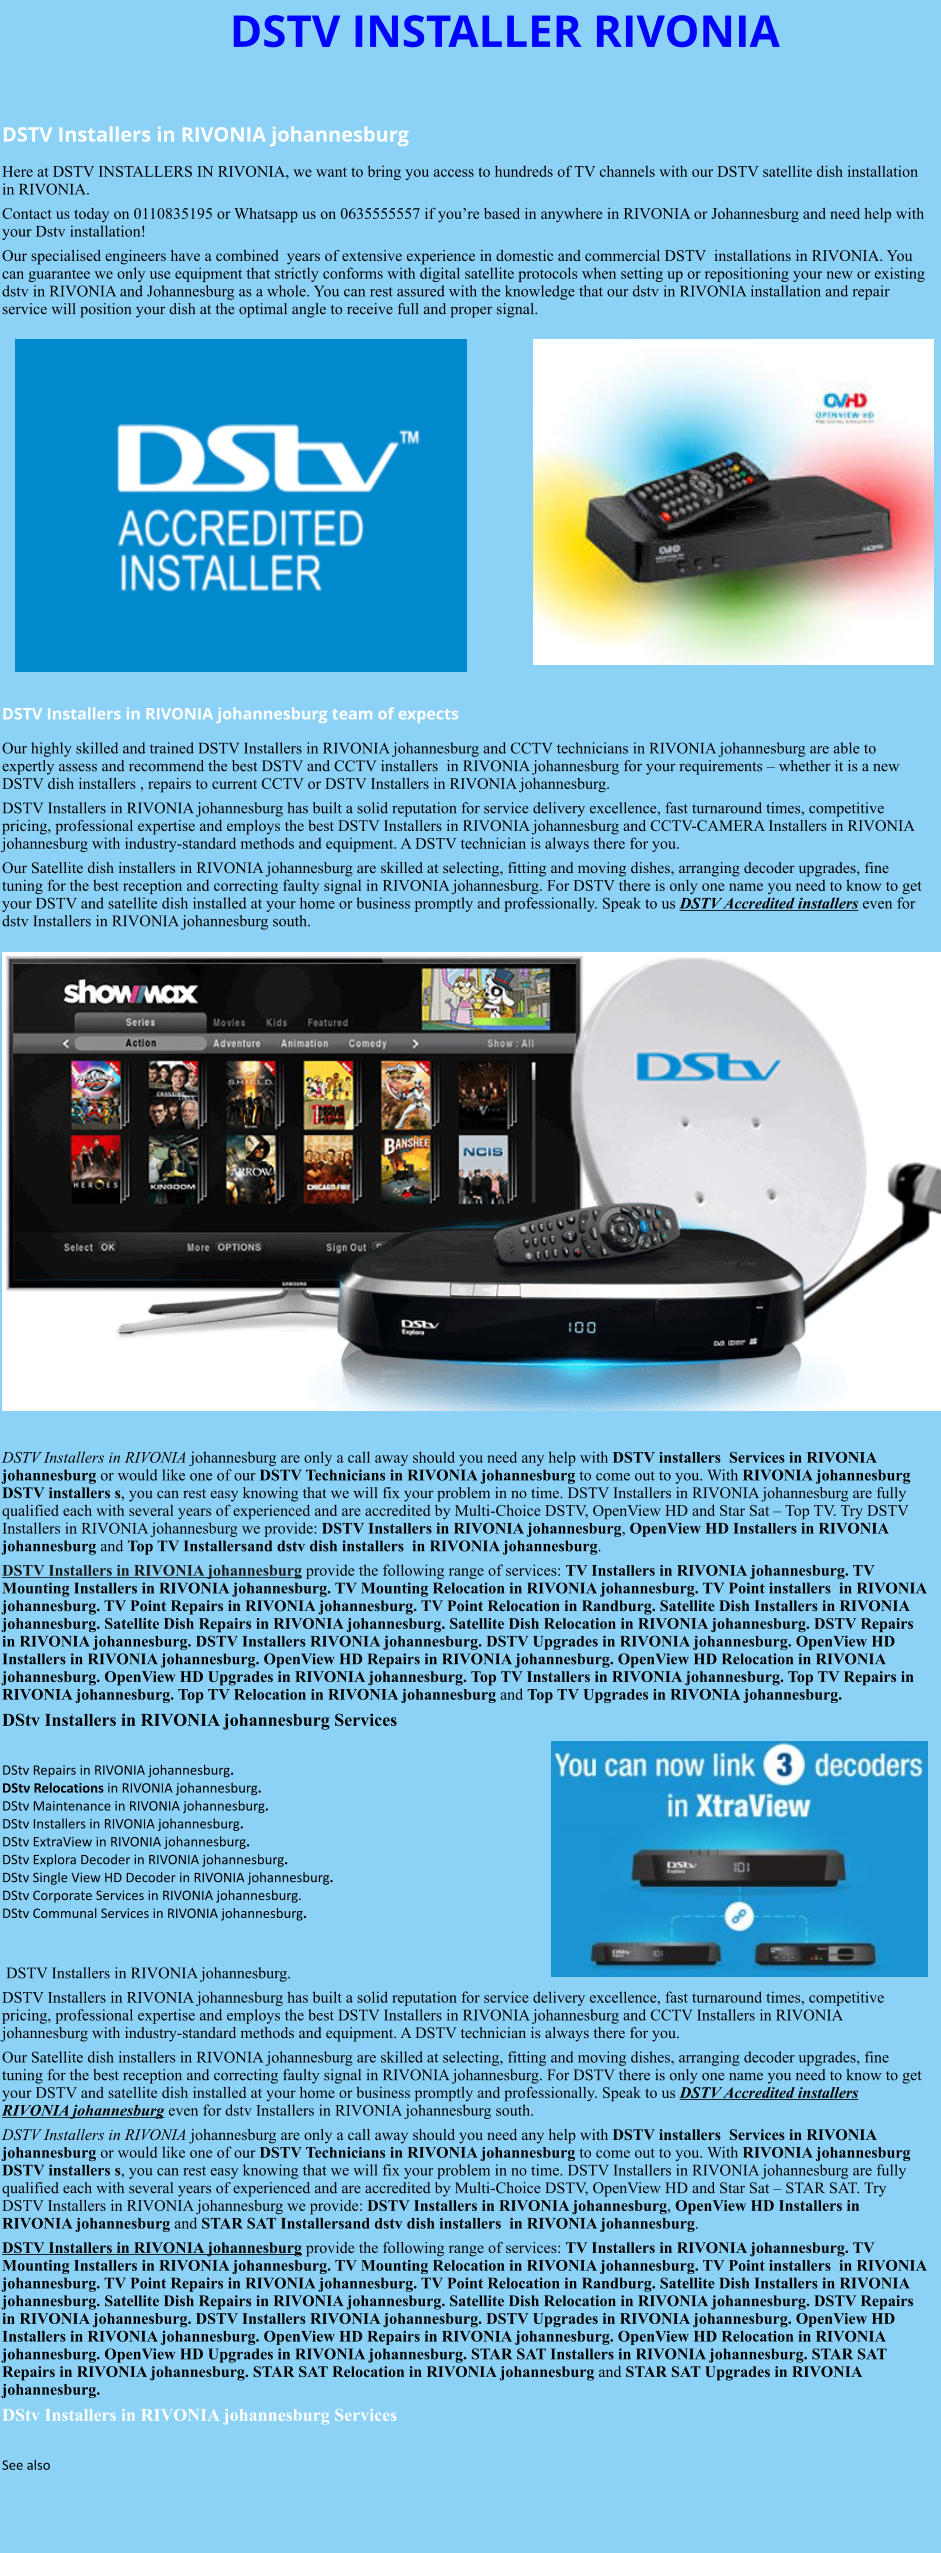 DSTV INSTALLER RIVONIA  DSTV Installers in RIVONIA johannesburg  Here at DSTV INSTALLERS IN RIVONIA, we want to bring you access to hundreds of TV channels with our DSTV satellite dish installation in RIVONIA. Contact us today on 0110835195 or Whatsapp us on 0635555557 if you’re based in anywhere in RIVONIA or Johannesburg and need help with your Dstv installation! Our specialised engineers have a combined  years of extensive experience in domestic and commercial DSTV  installations in RIVONIA. You can guarantee we only use equipment that strictly conforms with digital satellite protocols when setting up or repositioning your new or existing dstv in RIVONIA and Johannesburg as a whole. You can rest assured with the knowledge that our dstv in RIVONIA installation and repair service will position your dish at the optimal angle to receive full and proper signal.                DSTV Installers in RIVONIA johannesburg team of expects Our highly skilled and trained DSTV Installers in RIVONIA johannesburg and CCTV technicians in RIVONIA johannesburg are able to expertly assess and recommend the best DSTV and CCTV installers  in RIVONIA johannesburg for your requirements – whether it is a new DSTV dish installers , repairs to current CCTV or DSTV Installers in RIVONIA johannesburg. DSTV Installers in RIVONIA johannesburg has built a solid reputation for service delivery excellence, fast turnaround times, competitive pricing, professional expertise and employs the best DSTV Installers in RIVONIA johannesburg and CCTV-CAMERA Installers in RIVONIA johannesburg with industry-standard methods and equipment. A DSTV technician is always there for you. Our Satellite dish installers in RIVONIA johannesburg are skilled at selecting, fitting and moving dishes, arranging decoder upgrades, fine tuning for the best reception and correcting faulty signal in RIVONIA johannesburg. For DSTV there is only one name you need to know to get your DSTV and satellite dish installed at your home or business promptly and professionally. Speak to us DSTV Accredited installers even for dstv Installers in RIVONIA johannesburg south.                      DSTV Installers in RIVONIA johannesburg are only a call away should you need any help with DSTV installers  Services in RIVONIA johannesburg or would like one of our DSTV Technicians in RIVONIA johannesburg to come out to you. With RIVONIA johannesburg DSTV installers s, you can rest easy knowing that we will fix your problem in no time. DSTV Installers in RIVONIA johannesburg are fully qualified each with several years of experienced and are accredited by Multi-Choice DSTV, OpenView HD and Star Sat – Top TV. Try DSTV Installers in RIVONIA johannesburg we provide: DSTV Installers in RIVONIA johannesburg, OpenView HD Installers in RIVONIA johannesburg and Top TV Installersand dstv dish installers  in RIVONIA johannesburg. DSTV Installers in RIVONIA johannesburg provide the following range of services: TV Installers in RIVONIA johannesburg. TV Mounting Installers in RIVONIA johannesburg. TV Mounting Relocation in RIVONIA johannesburg. TV Point installers  in RIVONIA johannesburg. TV Point Repairs in RIVONIA johannesburg. TV Point Relocation in Randburg. Satellite Dish Installers in RIVONIA johannesburg. Satellite Dish Repairs in RIVONIA johannesburg. Satellite Dish Relocation in RIVONIA johannesburg. DSTV Repairs in RIVONIA johannesburg. DSTV Installers RIVONIA johannesburg. DSTV Upgrades in RIVONIA johannesburg. OpenView HD Installers in RIVONIA johannesburg. OpenView HD Repairs in RIVONIA johannesburg. OpenView HD Relocation in RIVONIA johannesburg. OpenView HD Upgrades in RIVONIA johannesburg. Top TV Installers in RIVONIA johannesburg. Top TV Repairs in RIVONIA johannesburg. Top TV Relocation in RIVONIA johannesburg and Top TV Upgrades in RIVONIA johannesburg. DStv Installers in RIVONIA johannesburg Services  DStv Repairs in RIVONIA johannesburg.  DStv Relocations in RIVONIA johannesburg.  DStv Maintenance in RIVONIA johannesburg. DStv Installers in RIVONIA johannesburg. DStv ExtraView in RIVONIA johannesburg. DStv Explora Decoder in RIVONIA johannesburg. DStv Single View HD Decoder in RIVONIA johannesburg. DStv Corporate Services in RIVONIA johannesburg. DStv Communal Services in RIVONIA johannesburg.    DSTV Installers in RIVONIA johannesburg. DSTV Installers in RIVONIA johannesburg has built a solid reputation for service delivery excellence, fast turnaround times, competitive pricing, professional expertise and employs the best DSTV Installers in RIVONIA johannesburg and CCTV Installers in RIVONIA johannesburg with industry-standard methods and equipment. A DSTV technician is always there for you. Our Satellite dish installers in RIVONIA johannesburg are skilled at selecting, fitting and moving dishes, arranging decoder upgrades, fine tuning for the best reception and correcting faulty signal in RIVONIA johannesburg. For DSTV there is only one name you need to know to get your DSTV and satellite dish installed at your home or business promptly and professionally. Speak to us DSTV Accredited installers RIVONIA johannesburg even for dstv Installers in RIVONIA johannesburg south. DSTV Installers in RIVONIA johannesburg are only a call away should you need any help with DSTV installers  Services in RIVONIA johannesburg or would like one of our DSTV Technicians in RIVONIA johannesburg to come out to you. With RIVONIA johannesburg DSTV installers s, you can rest easy knowing that we will fix your problem in no time. DSTV Installers in RIVONIA johannesburg are fully qualified each with several years of experienced and are accredited by Multi-Choice DSTV, OpenView HD and Star Sat – STAR SAT. Try DSTV Installers in RIVONIA johannesburg we provide: DSTV Installers in RIVONIA johannesburg, OpenView HD Installers in RIVONIA johannesburg and STAR SAT Installersand dstv dish installers  in RIVONIA johannesburg. DSTV Installers in RIVONIA johannesburg provide the following range of services: TV Installers in RIVONIA johannesburg. TV Mounting Installers in RIVONIA johannesburg. TV Mounting Relocation in RIVONIA johannesburg. TV Point installers  in RIVONIA johannesburg. TV Point Repairs in RIVONIA johannesburg. TV Point Relocation in Randburg. Satellite Dish Installers in RIVONIA johannesburg. Satellite Dish Repairs in RIVONIA johannesburg. Satellite Dish Relocation in RIVONIA johannesburg. DSTV Repairs in RIVONIA johannesburg. DSTV Installers RIVONIA johannesburg. DSTV Upgrades in RIVONIA johannesburg. OpenView HD Installers in RIVONIA johannesburg. OpenView HD Repairs in RIVONIA johannesburg. OpenView HD Relocation in RIVONIA johannesburg. OpenView HD Upgrades in RIVONIA johannesburg. STAR SAT Installers in RIVONIA johannesburg. STAR SAT Repairs in RIVONIA johannesburg. STAR SAT Relocation in RIVONIA johannesburg and STAR SAT Upgrades in RIVONIA johannesburg. DStv Installers in RIVONIA johannesburg Services  See also